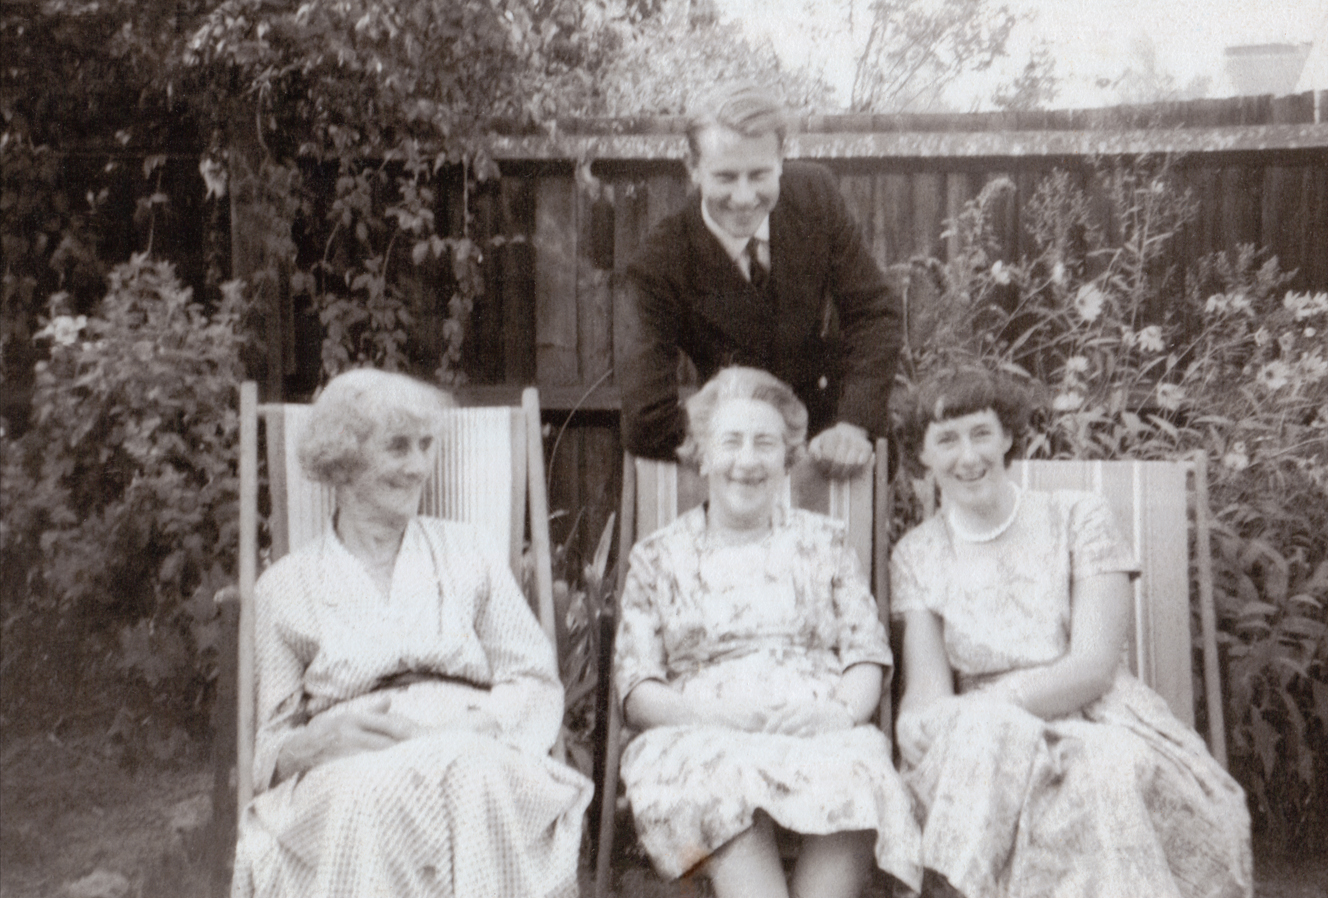 Olive Enock (wife of Madge's cousin Jack Enock), Madge, Joan Enock (1st cousin 1x removed), Ernie Wildridge at the back. Photo taken Sunday, 20th September, 1959 - 24 Dovercourt Road, Dulwich